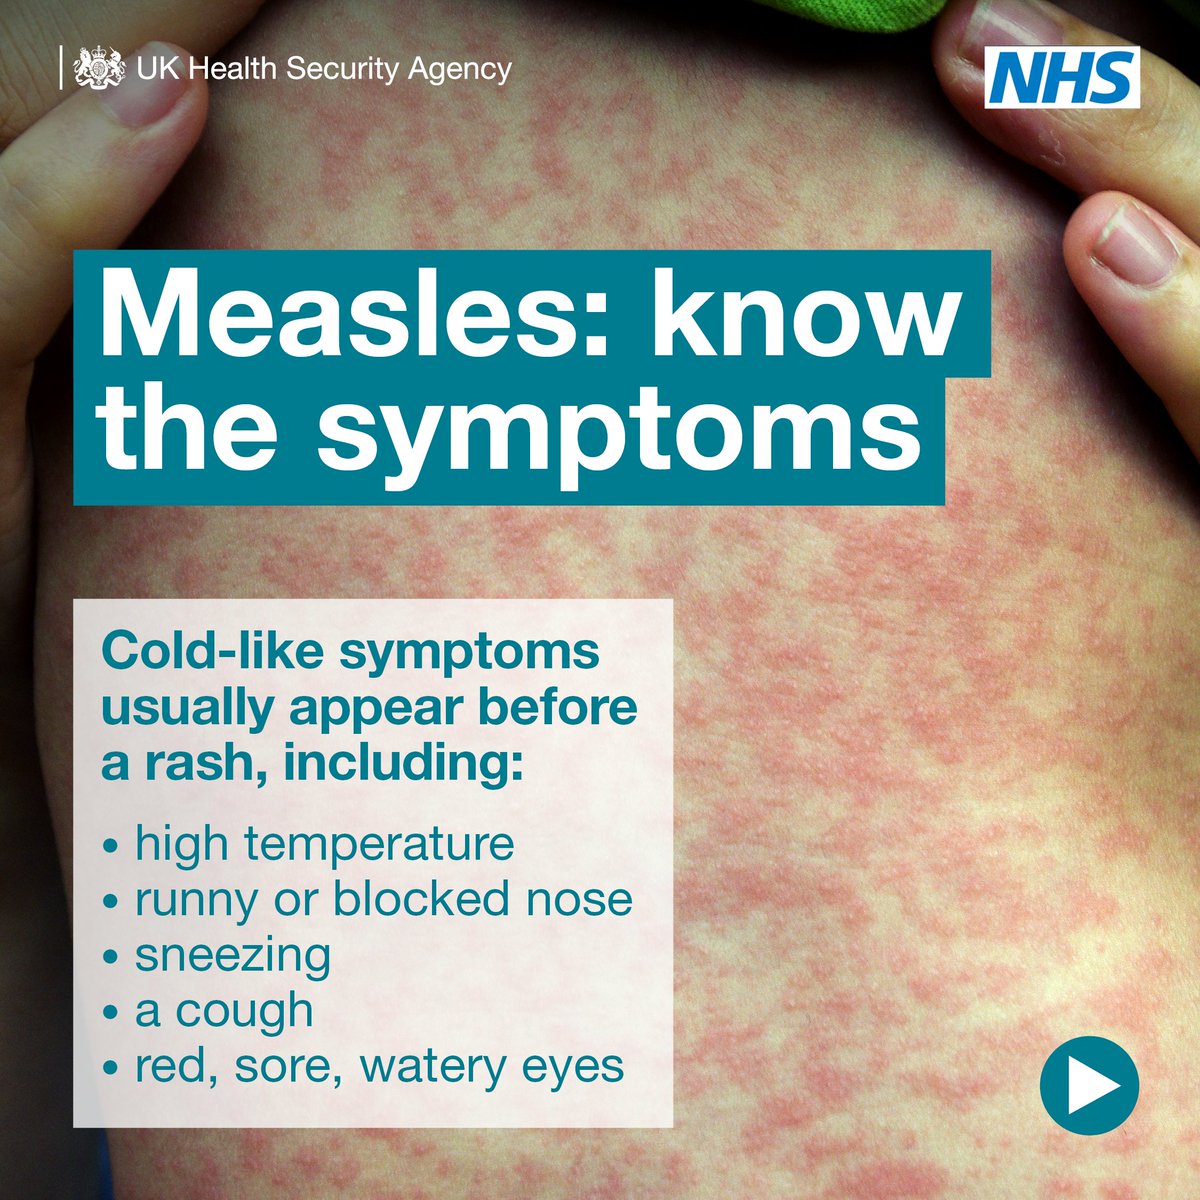 Here’s what you need to know about #measles, from the signs and symptoms to look for to what to do if you think you or your child has measles. More info: nhs.uk/conditions/mea…